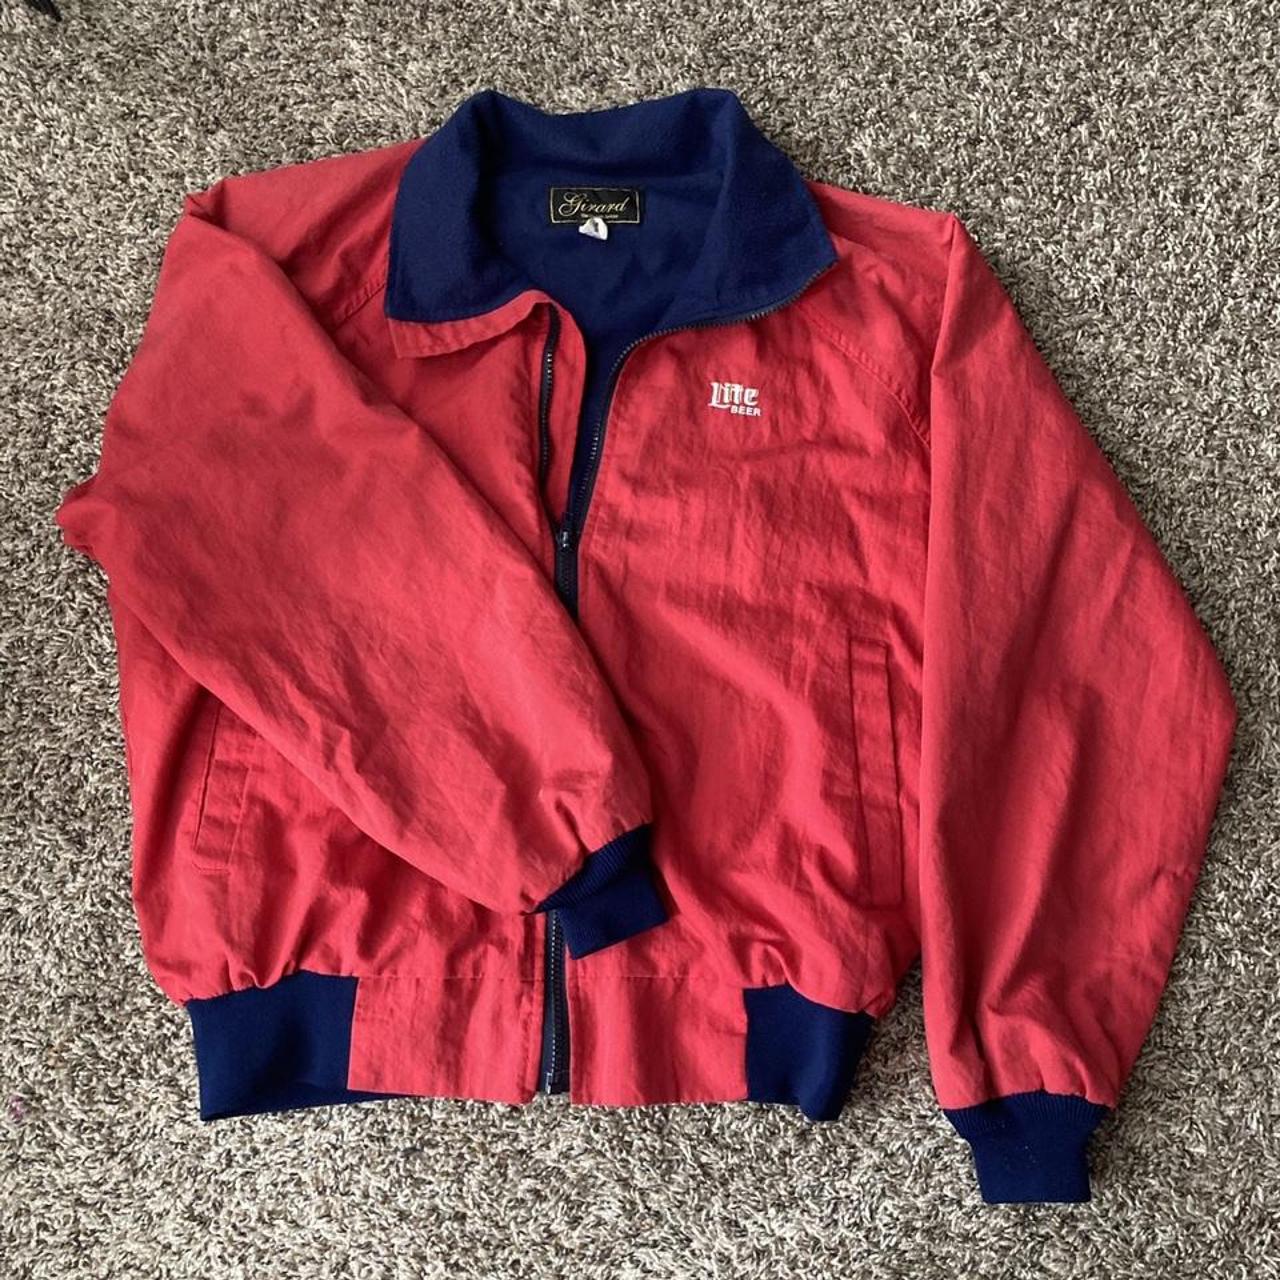 Product Image 1 - Red Miller Light jacket with